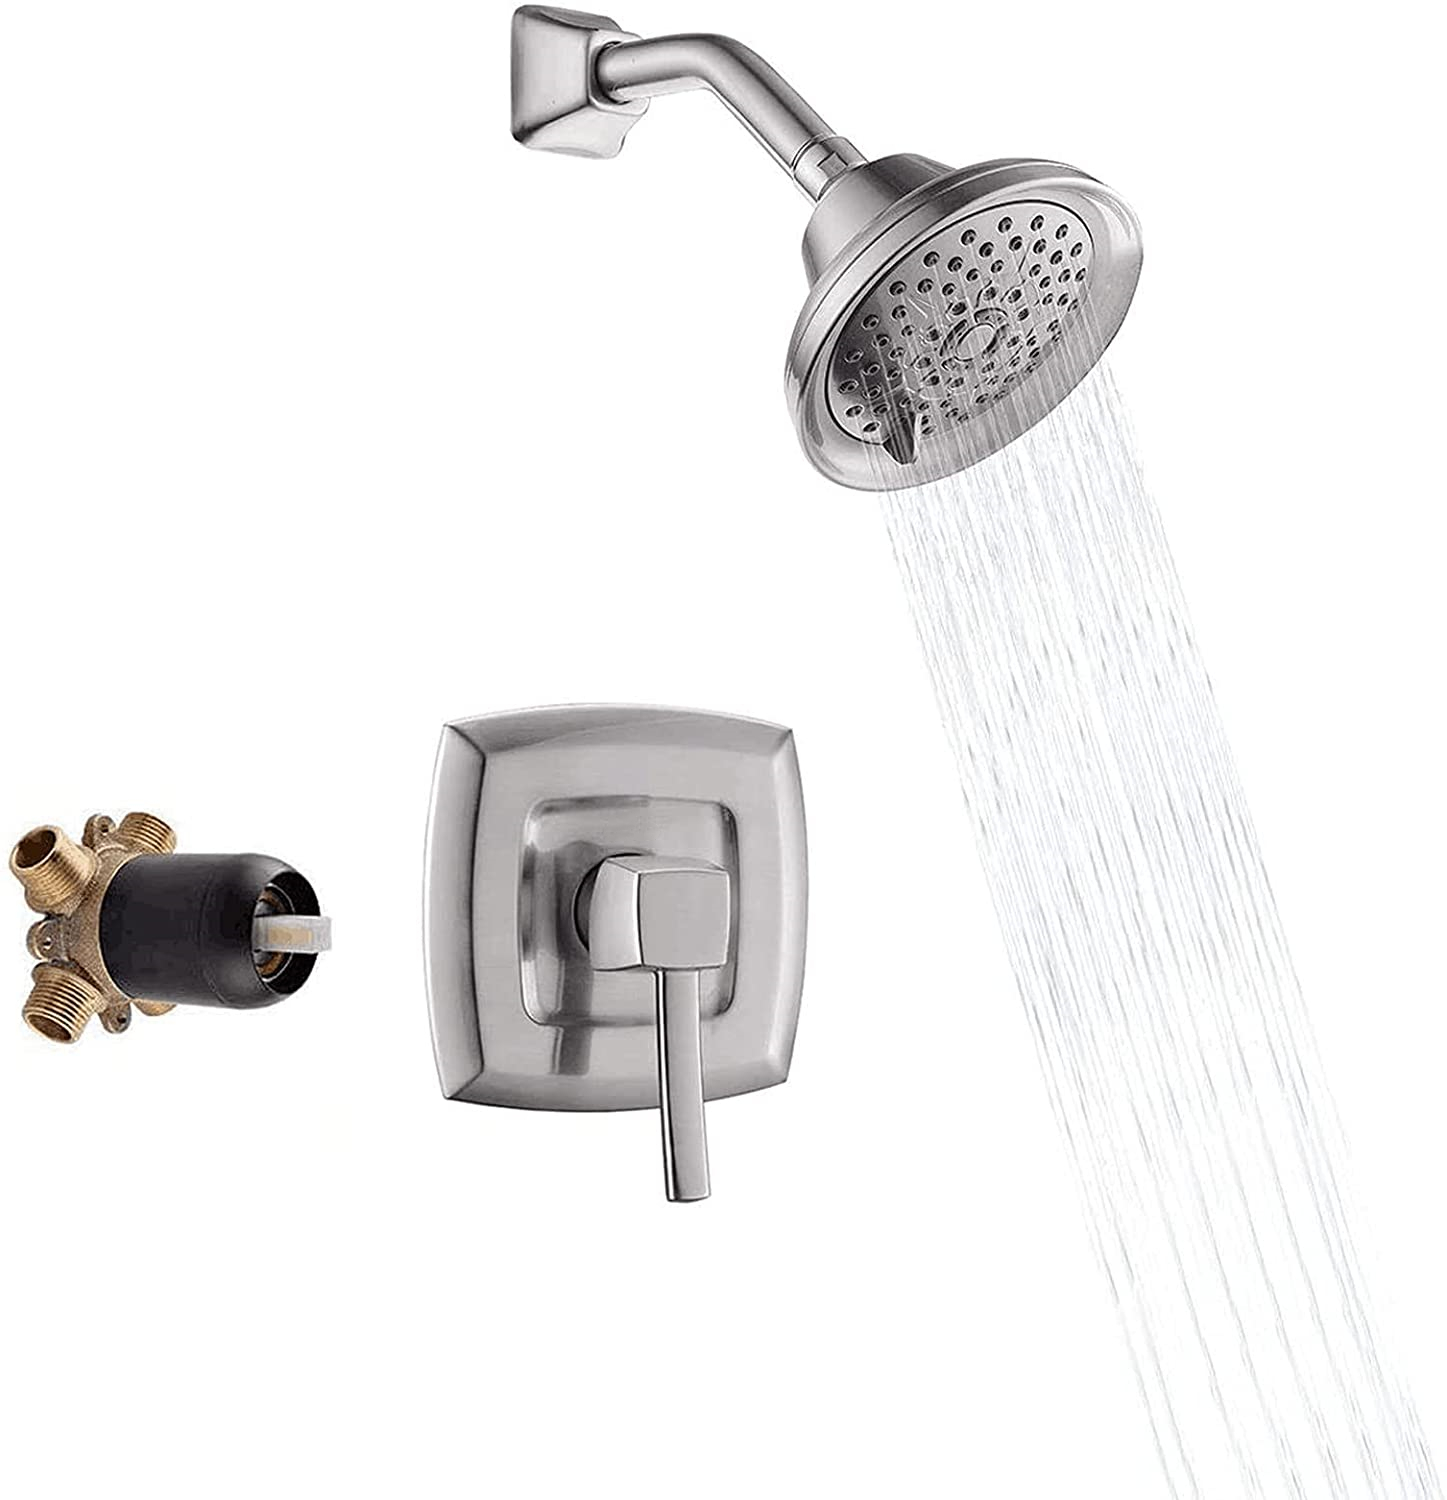 Antique Wall Shower Concealed Shower Faucets Mixers Brass Copper Faucet Wall Mounted Shower Set